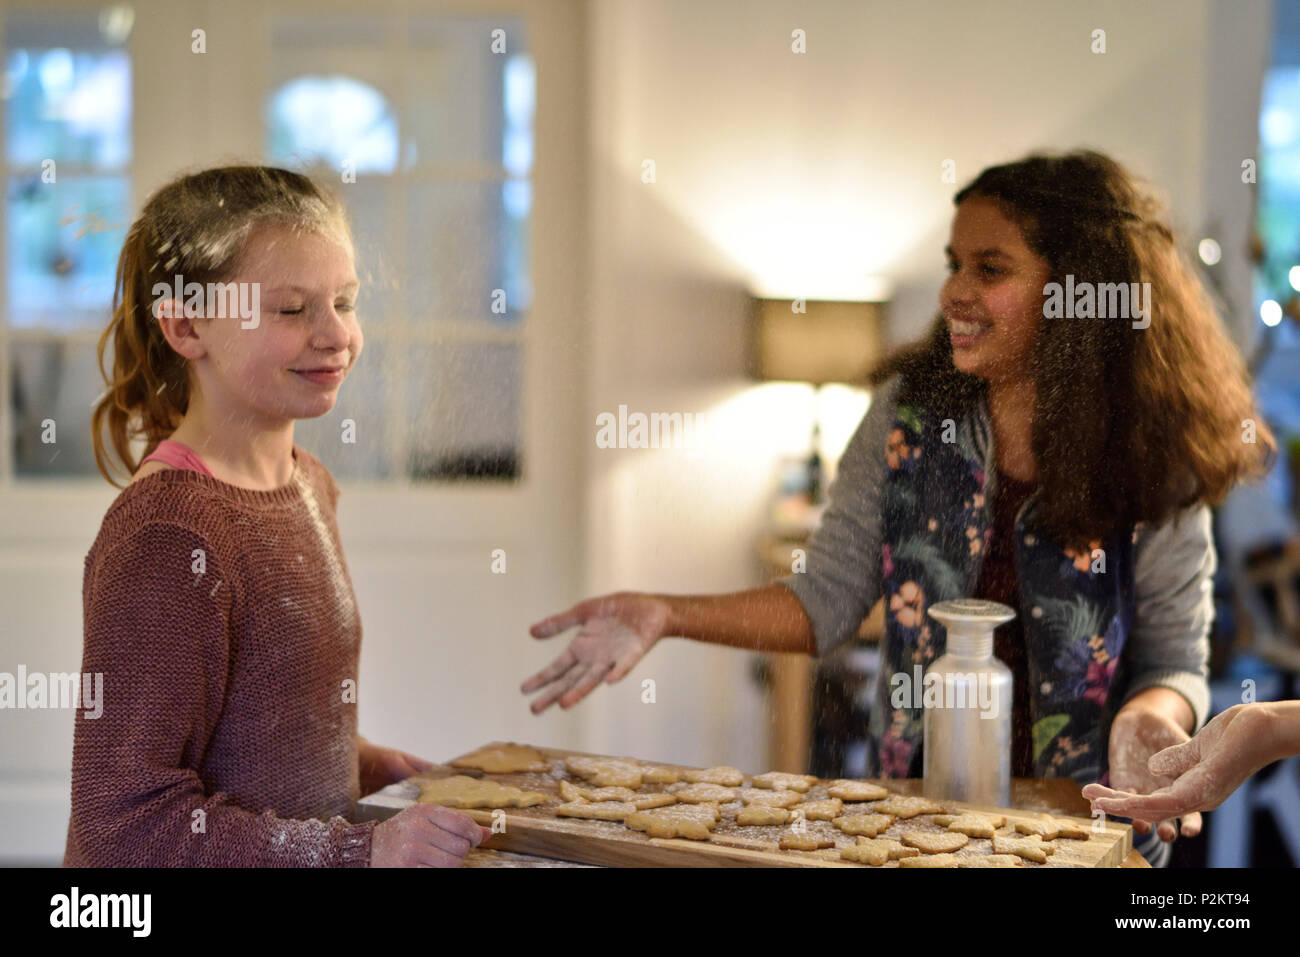 11 ans Filles baking christmas cookies, Hambourg, Allemagne Banque D'Images